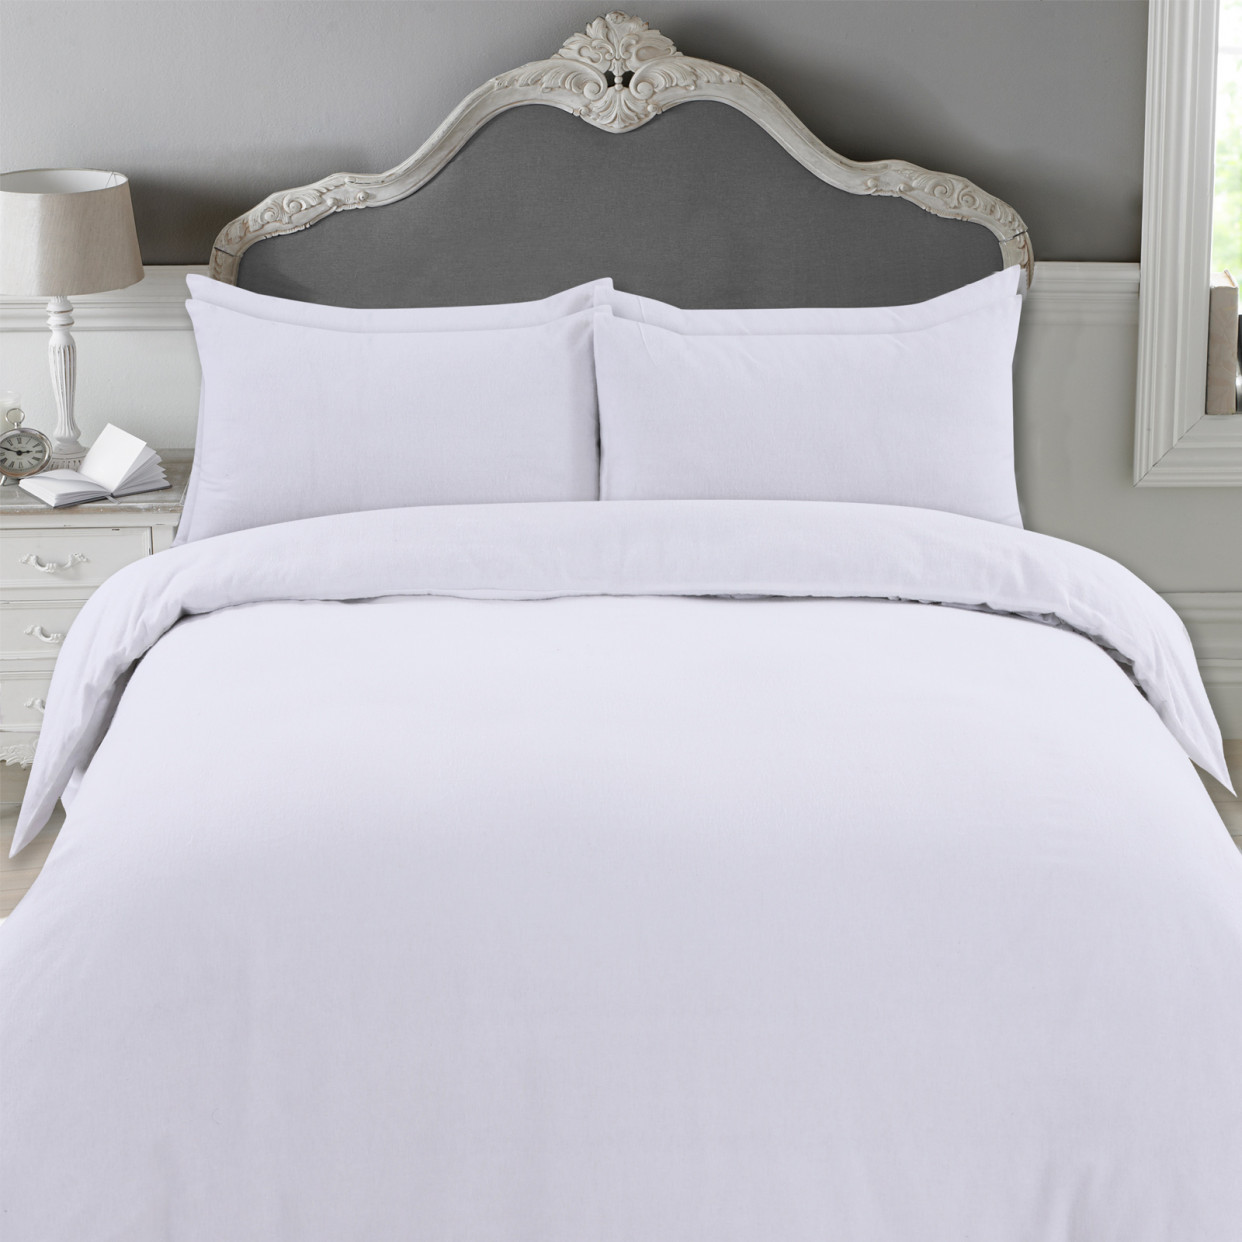 Highams 100% Brushed Cotton Duvet Cover with Pillowcase Plain Flannelette Thermal Bedding Set, Pure White - Superking>